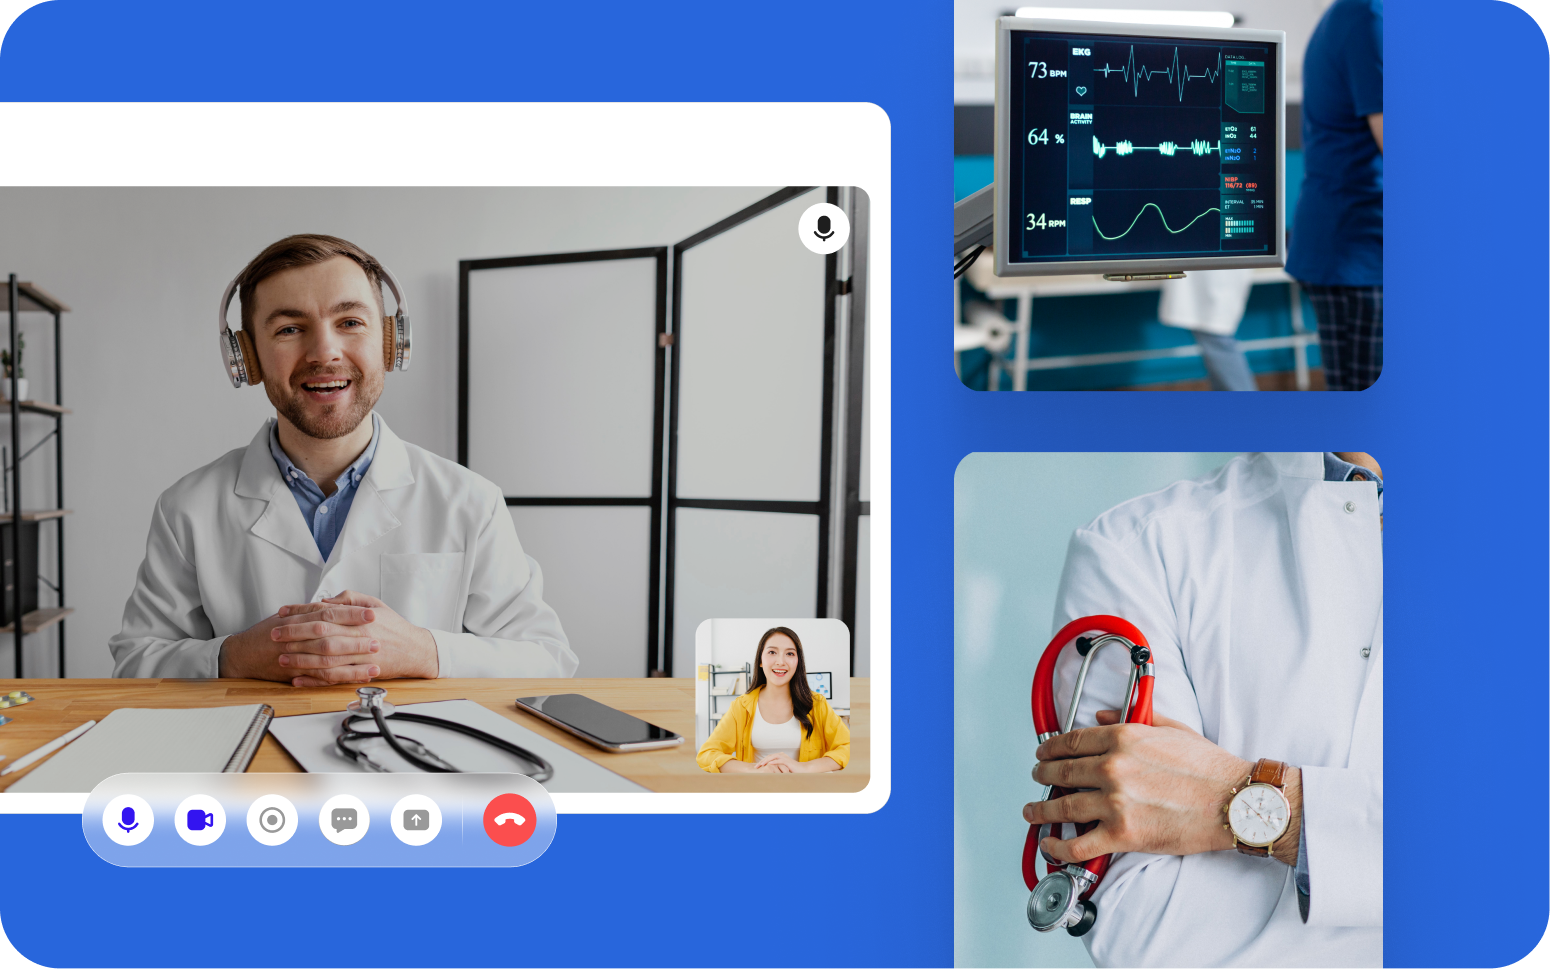 150+ hospitals expand patient access with a secure telehealth app